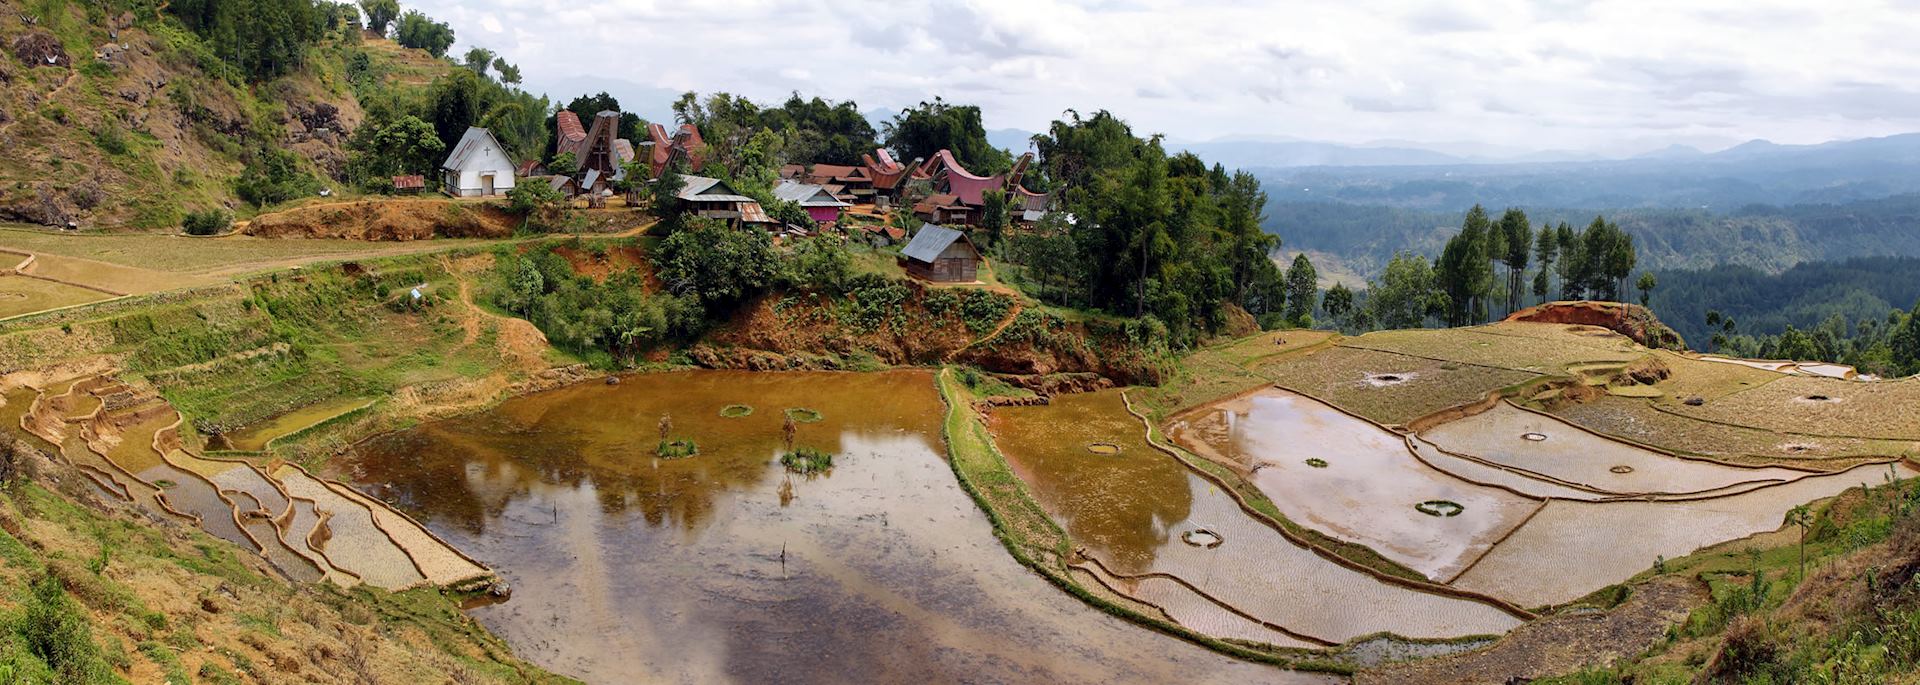 Village of Limbong in Sulawesi